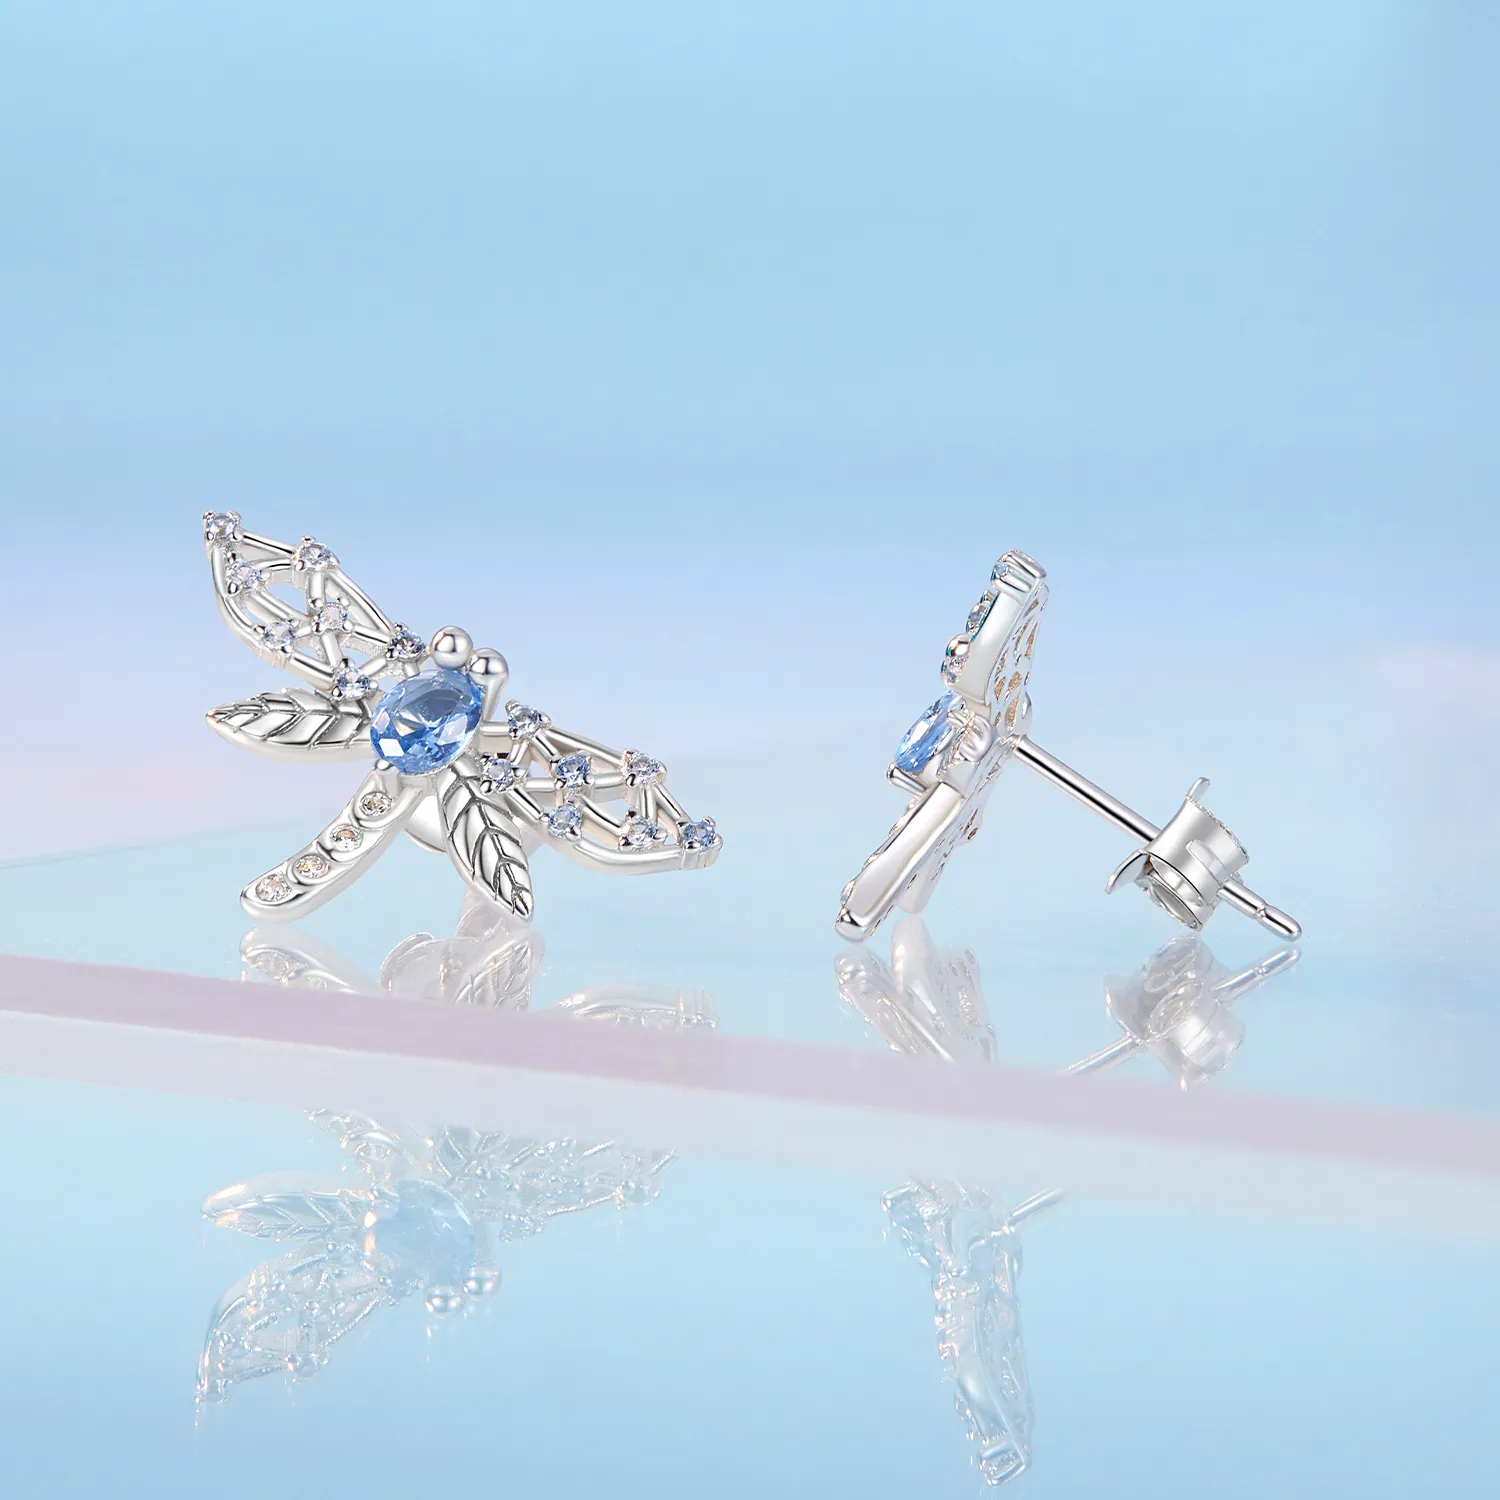 Pandora Style Dragonfly Studs Earrings - BSE874